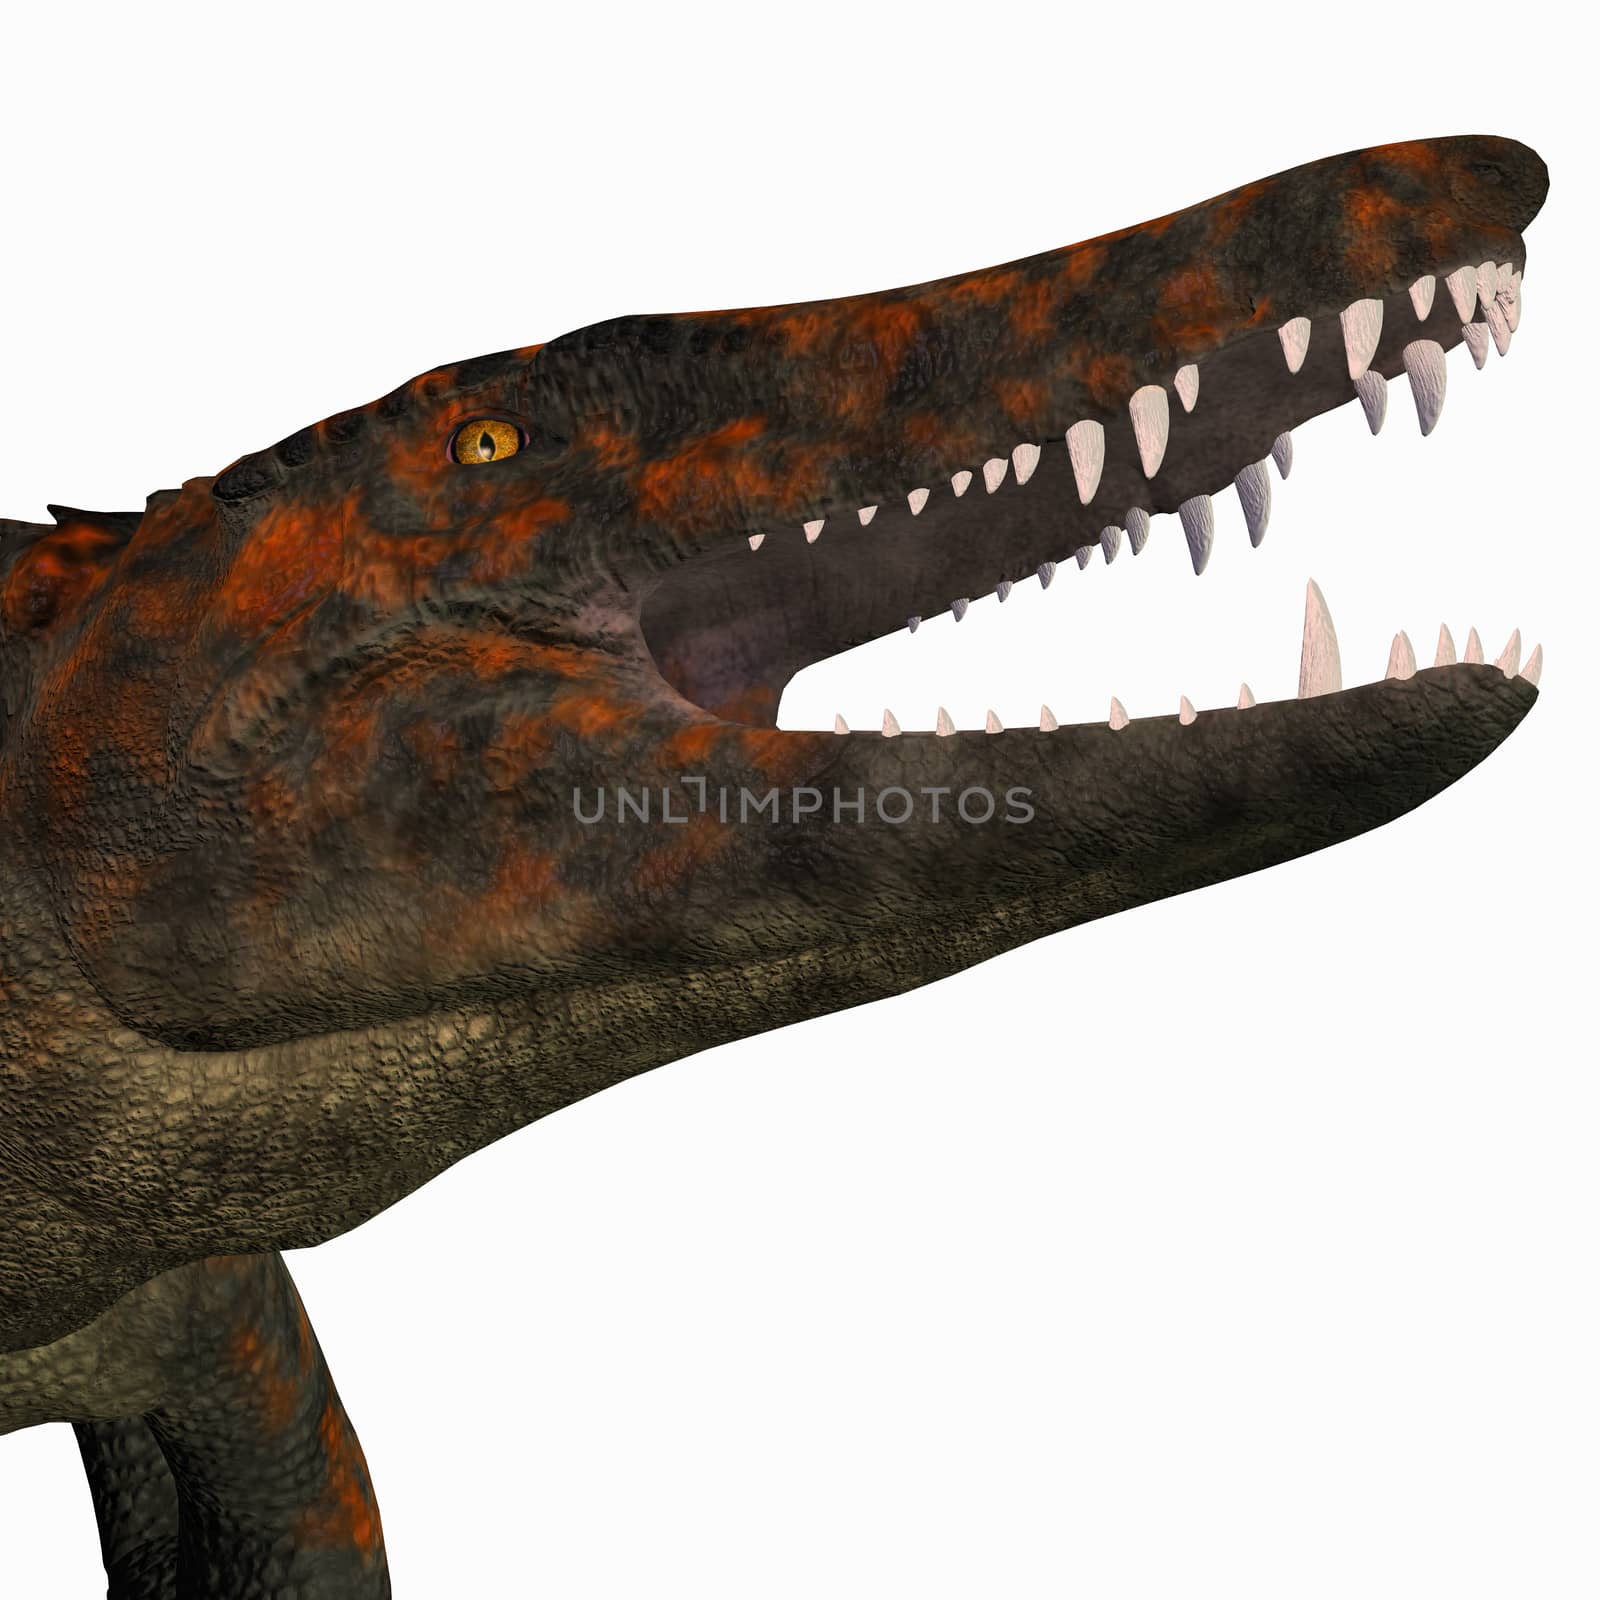 Uberabasuchus was an carnivorous crocodile that lived in the Cretaceous Period of Brazil.